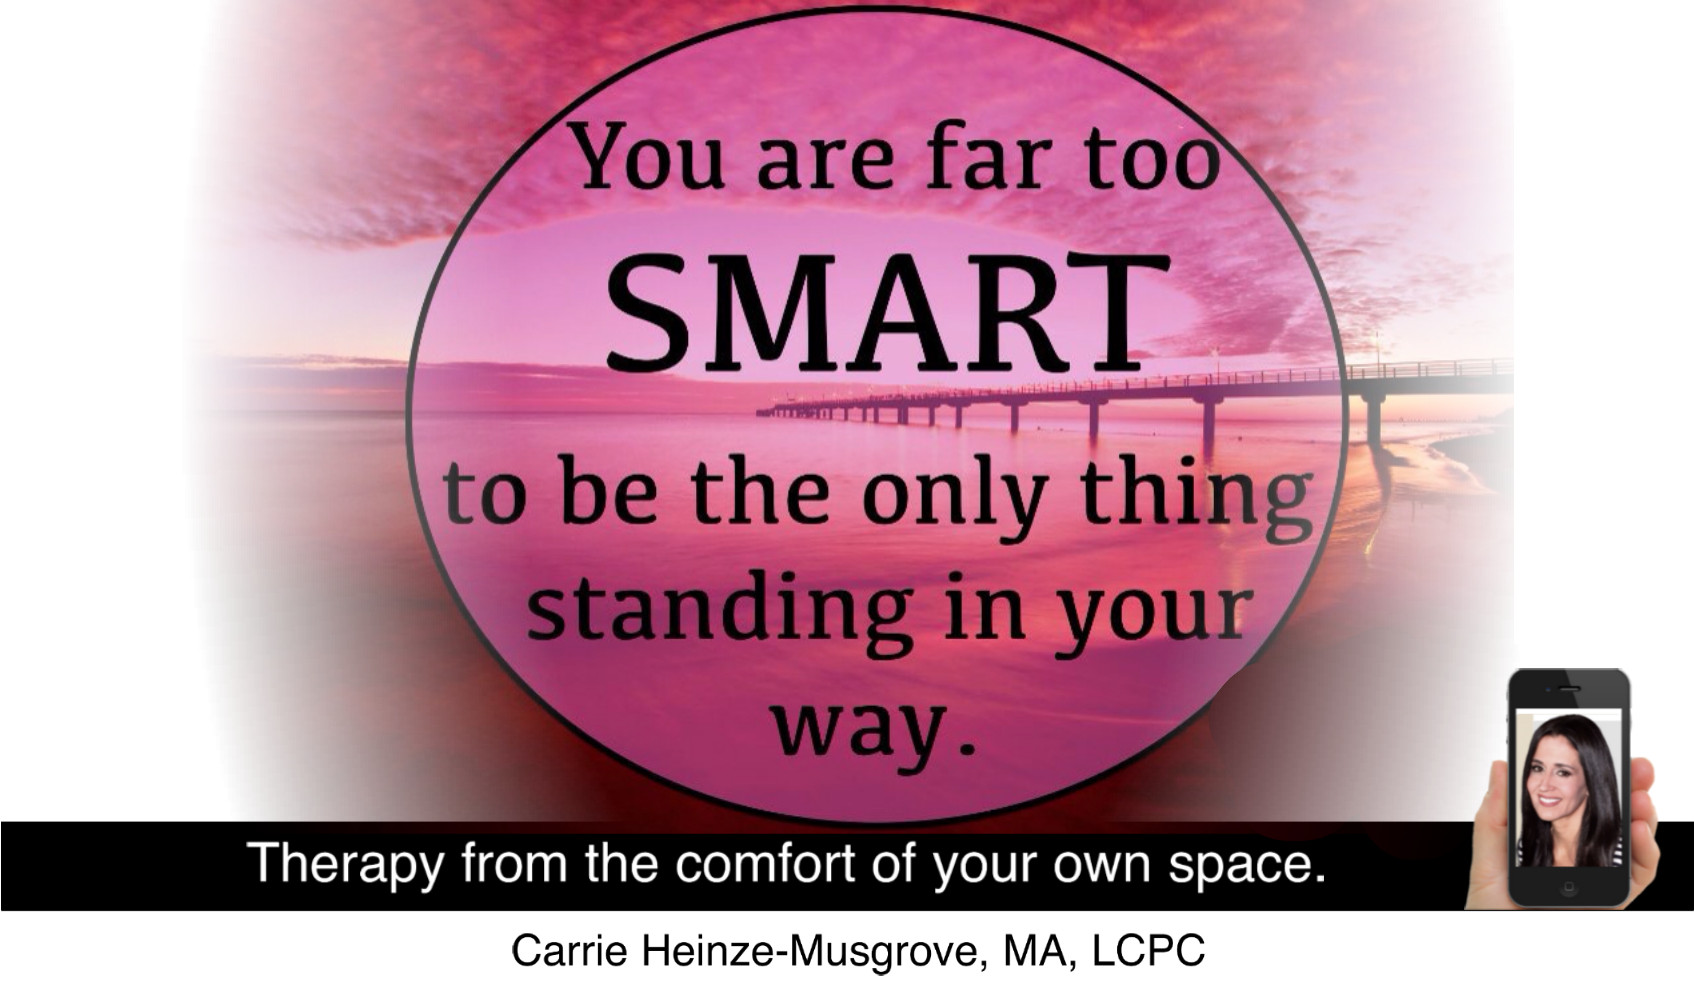 You are too smart to be the only thing standing in your way.